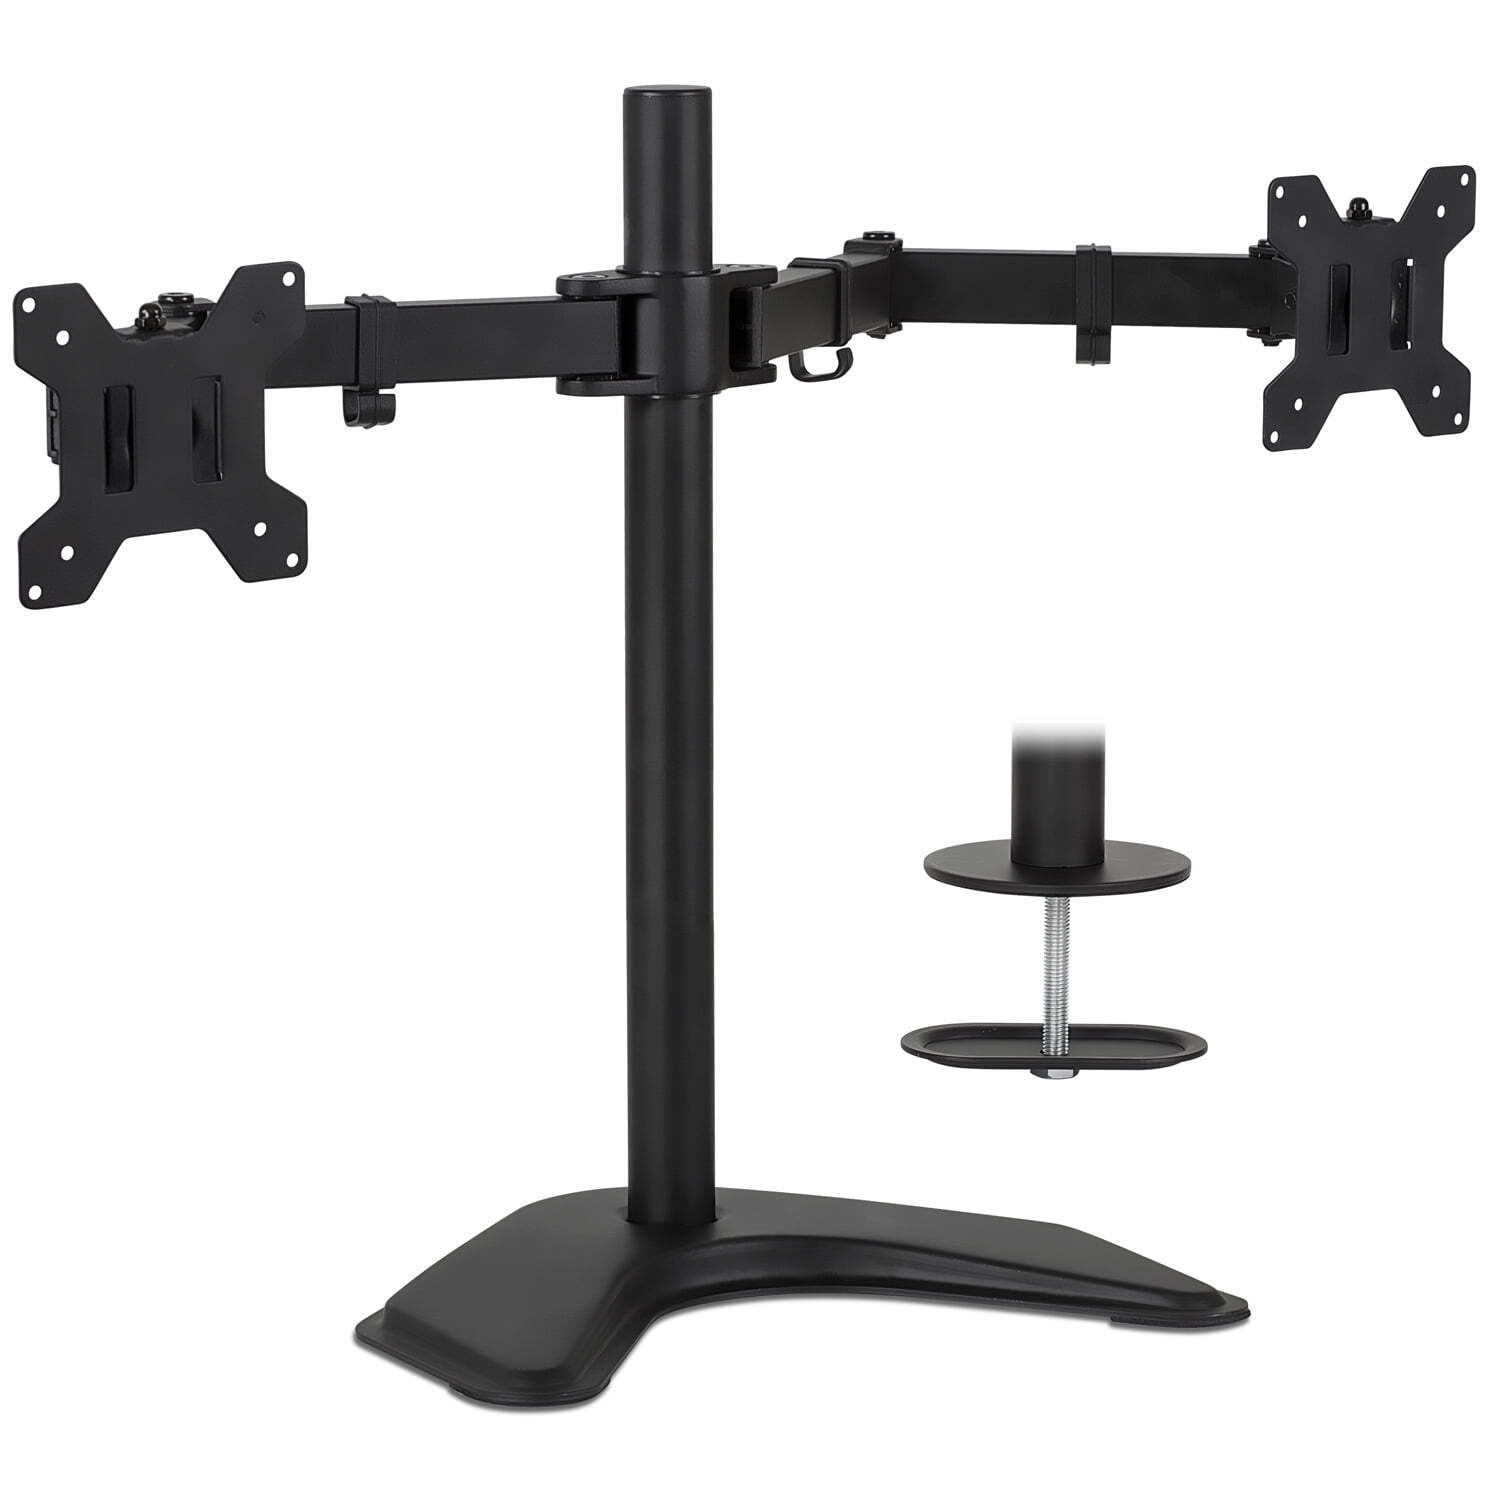 Dual Mount Stand LCD Screen Monitor Desk TV Bracket Adjustable Up To 32'' NEW